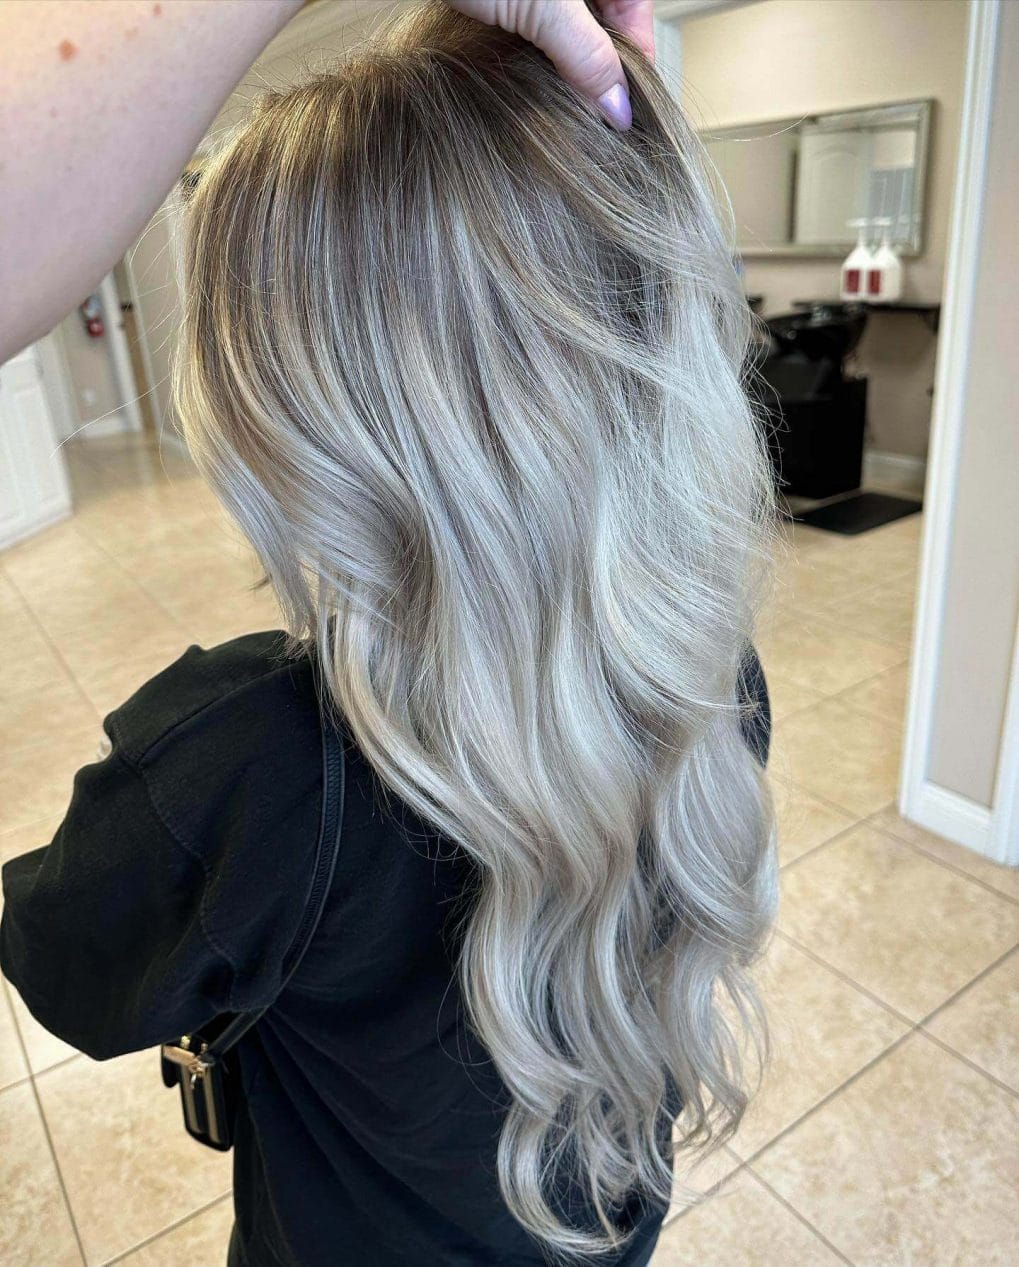 Icy blonde balayage from dark roots to silver ends, portraying winter's crisp elegance.